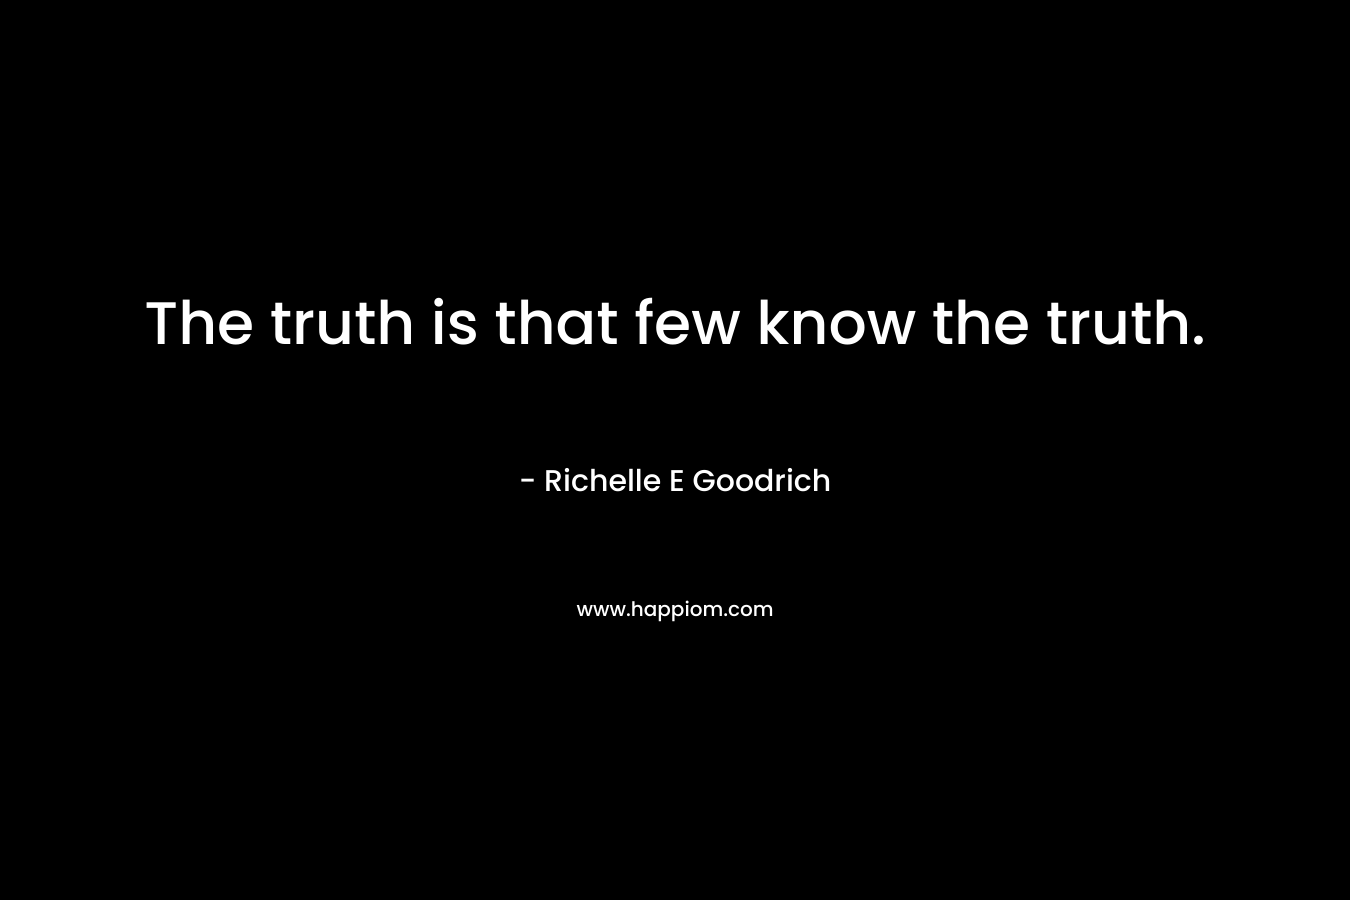 The truth is that few know the truth.